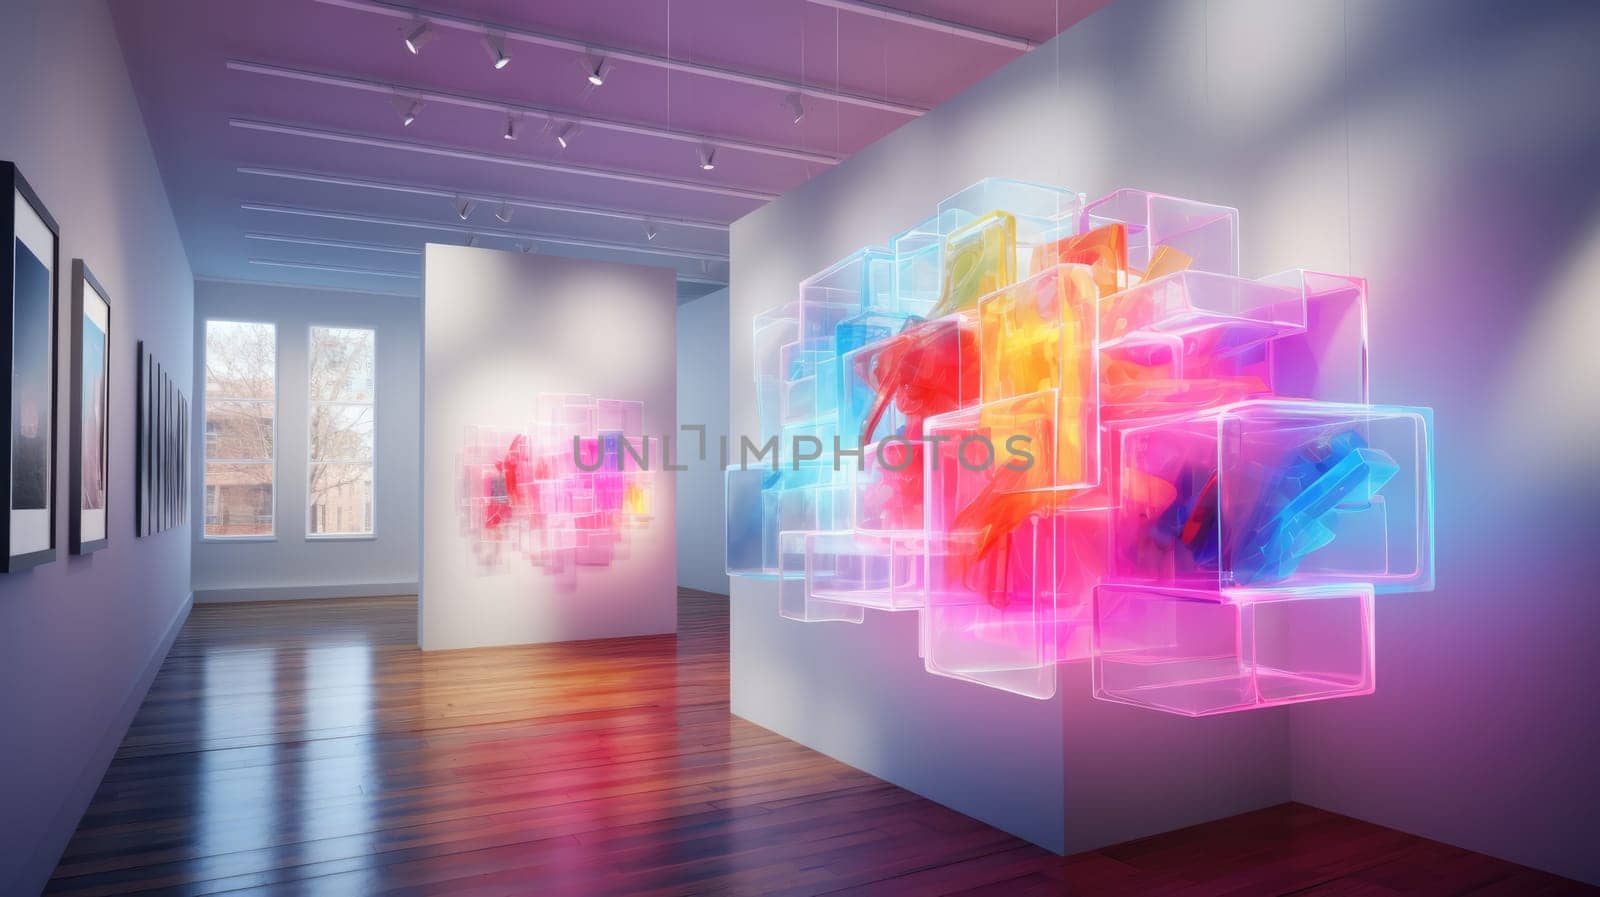 Virtual museum. Digital art. NFT. AI and Augmented Reality exhibition. Art installations in the gallery